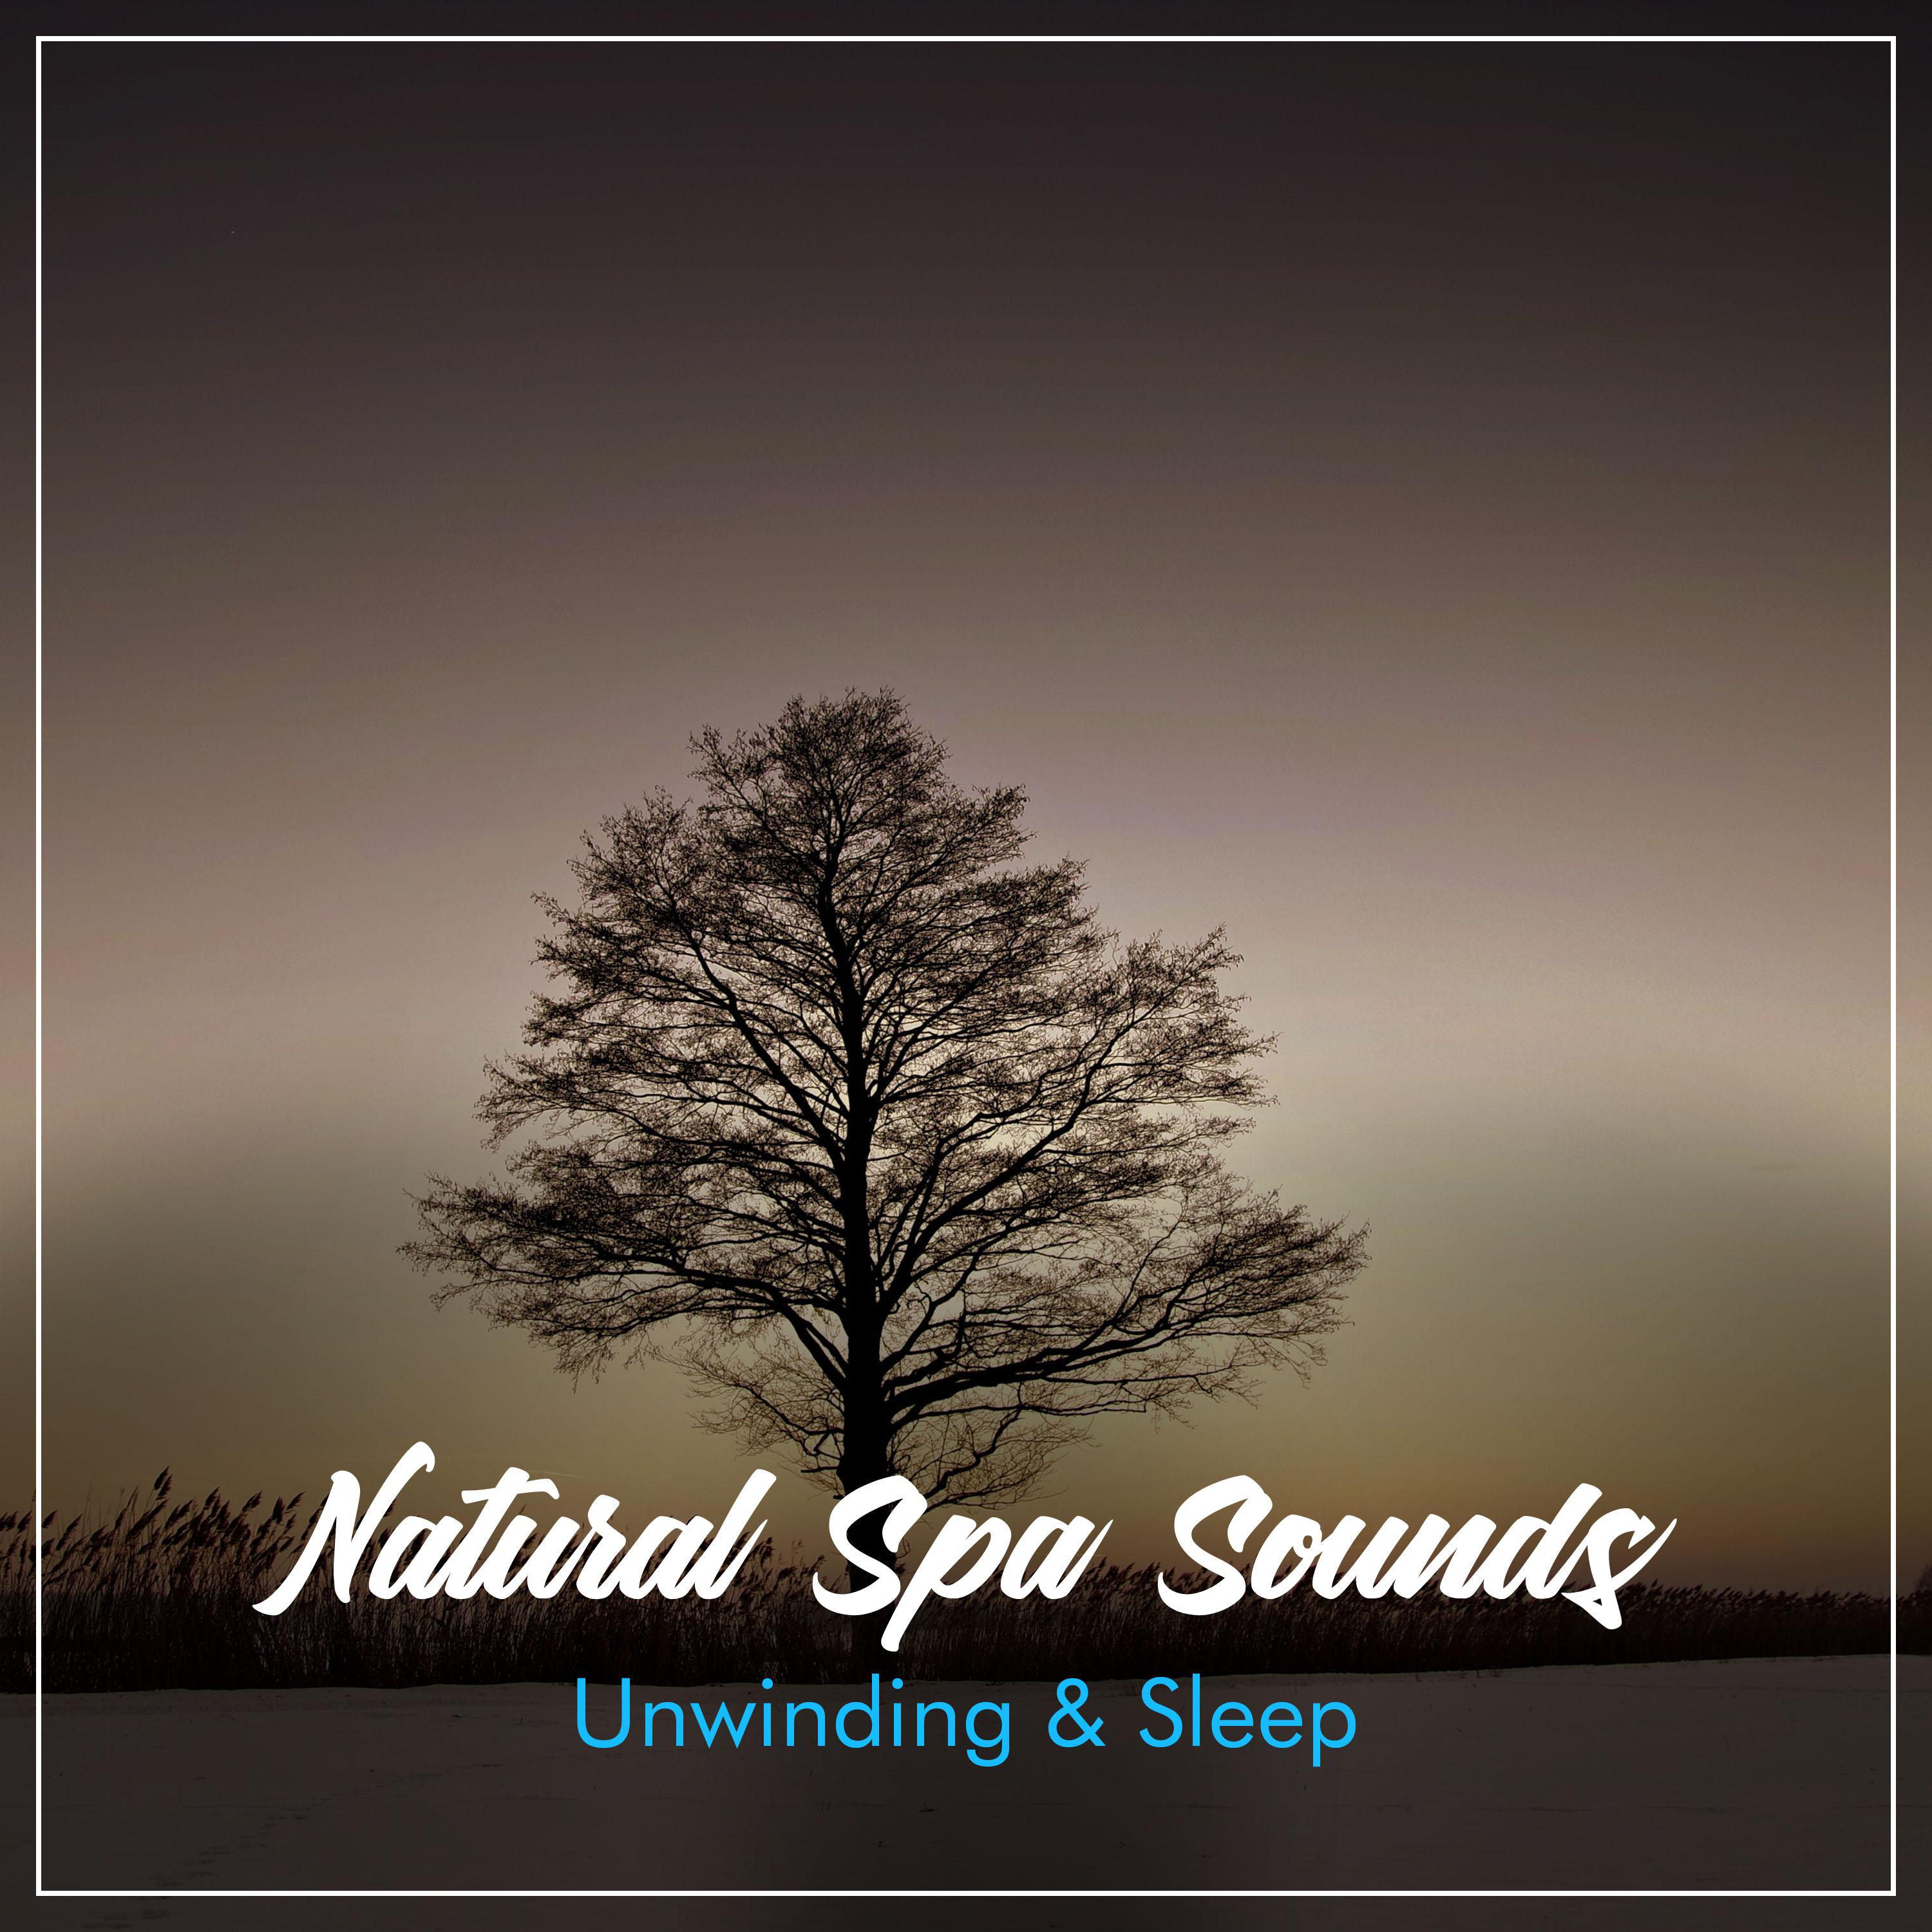 15 Natural Spa Sounds for Relaxation, Unwinding and Sleep